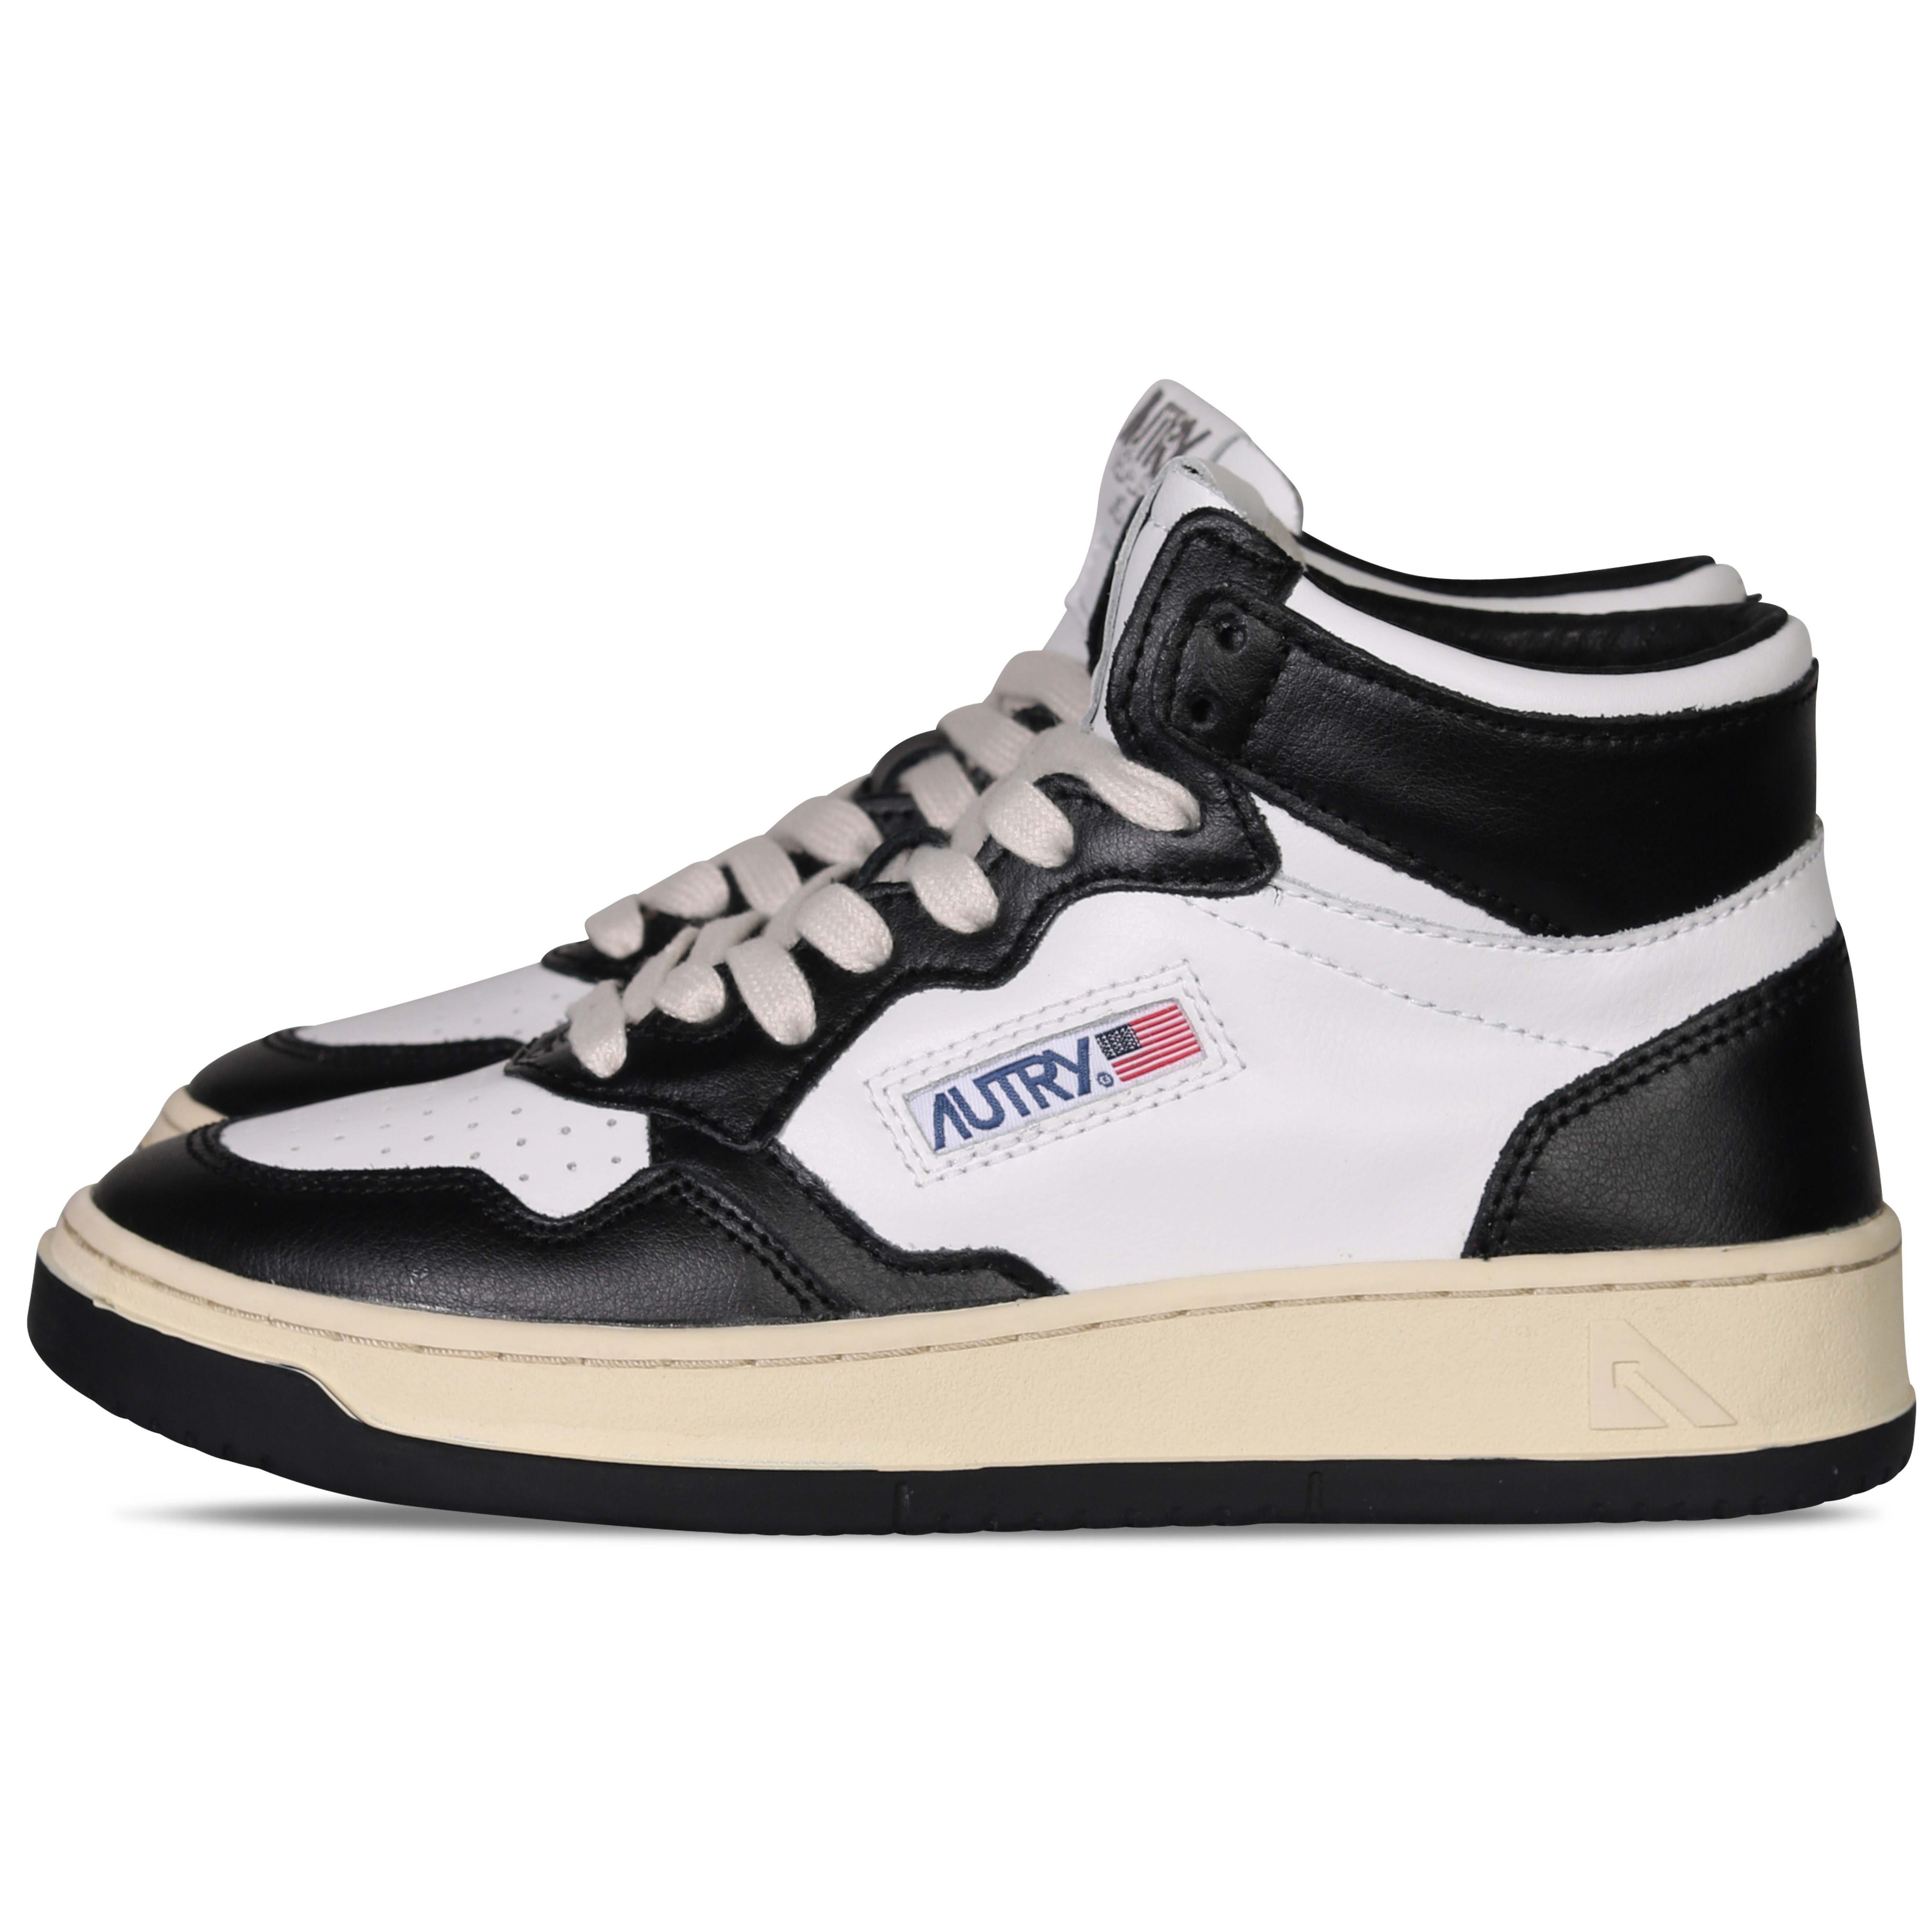 Autry Action Shoes Mid Sneaker White/Black